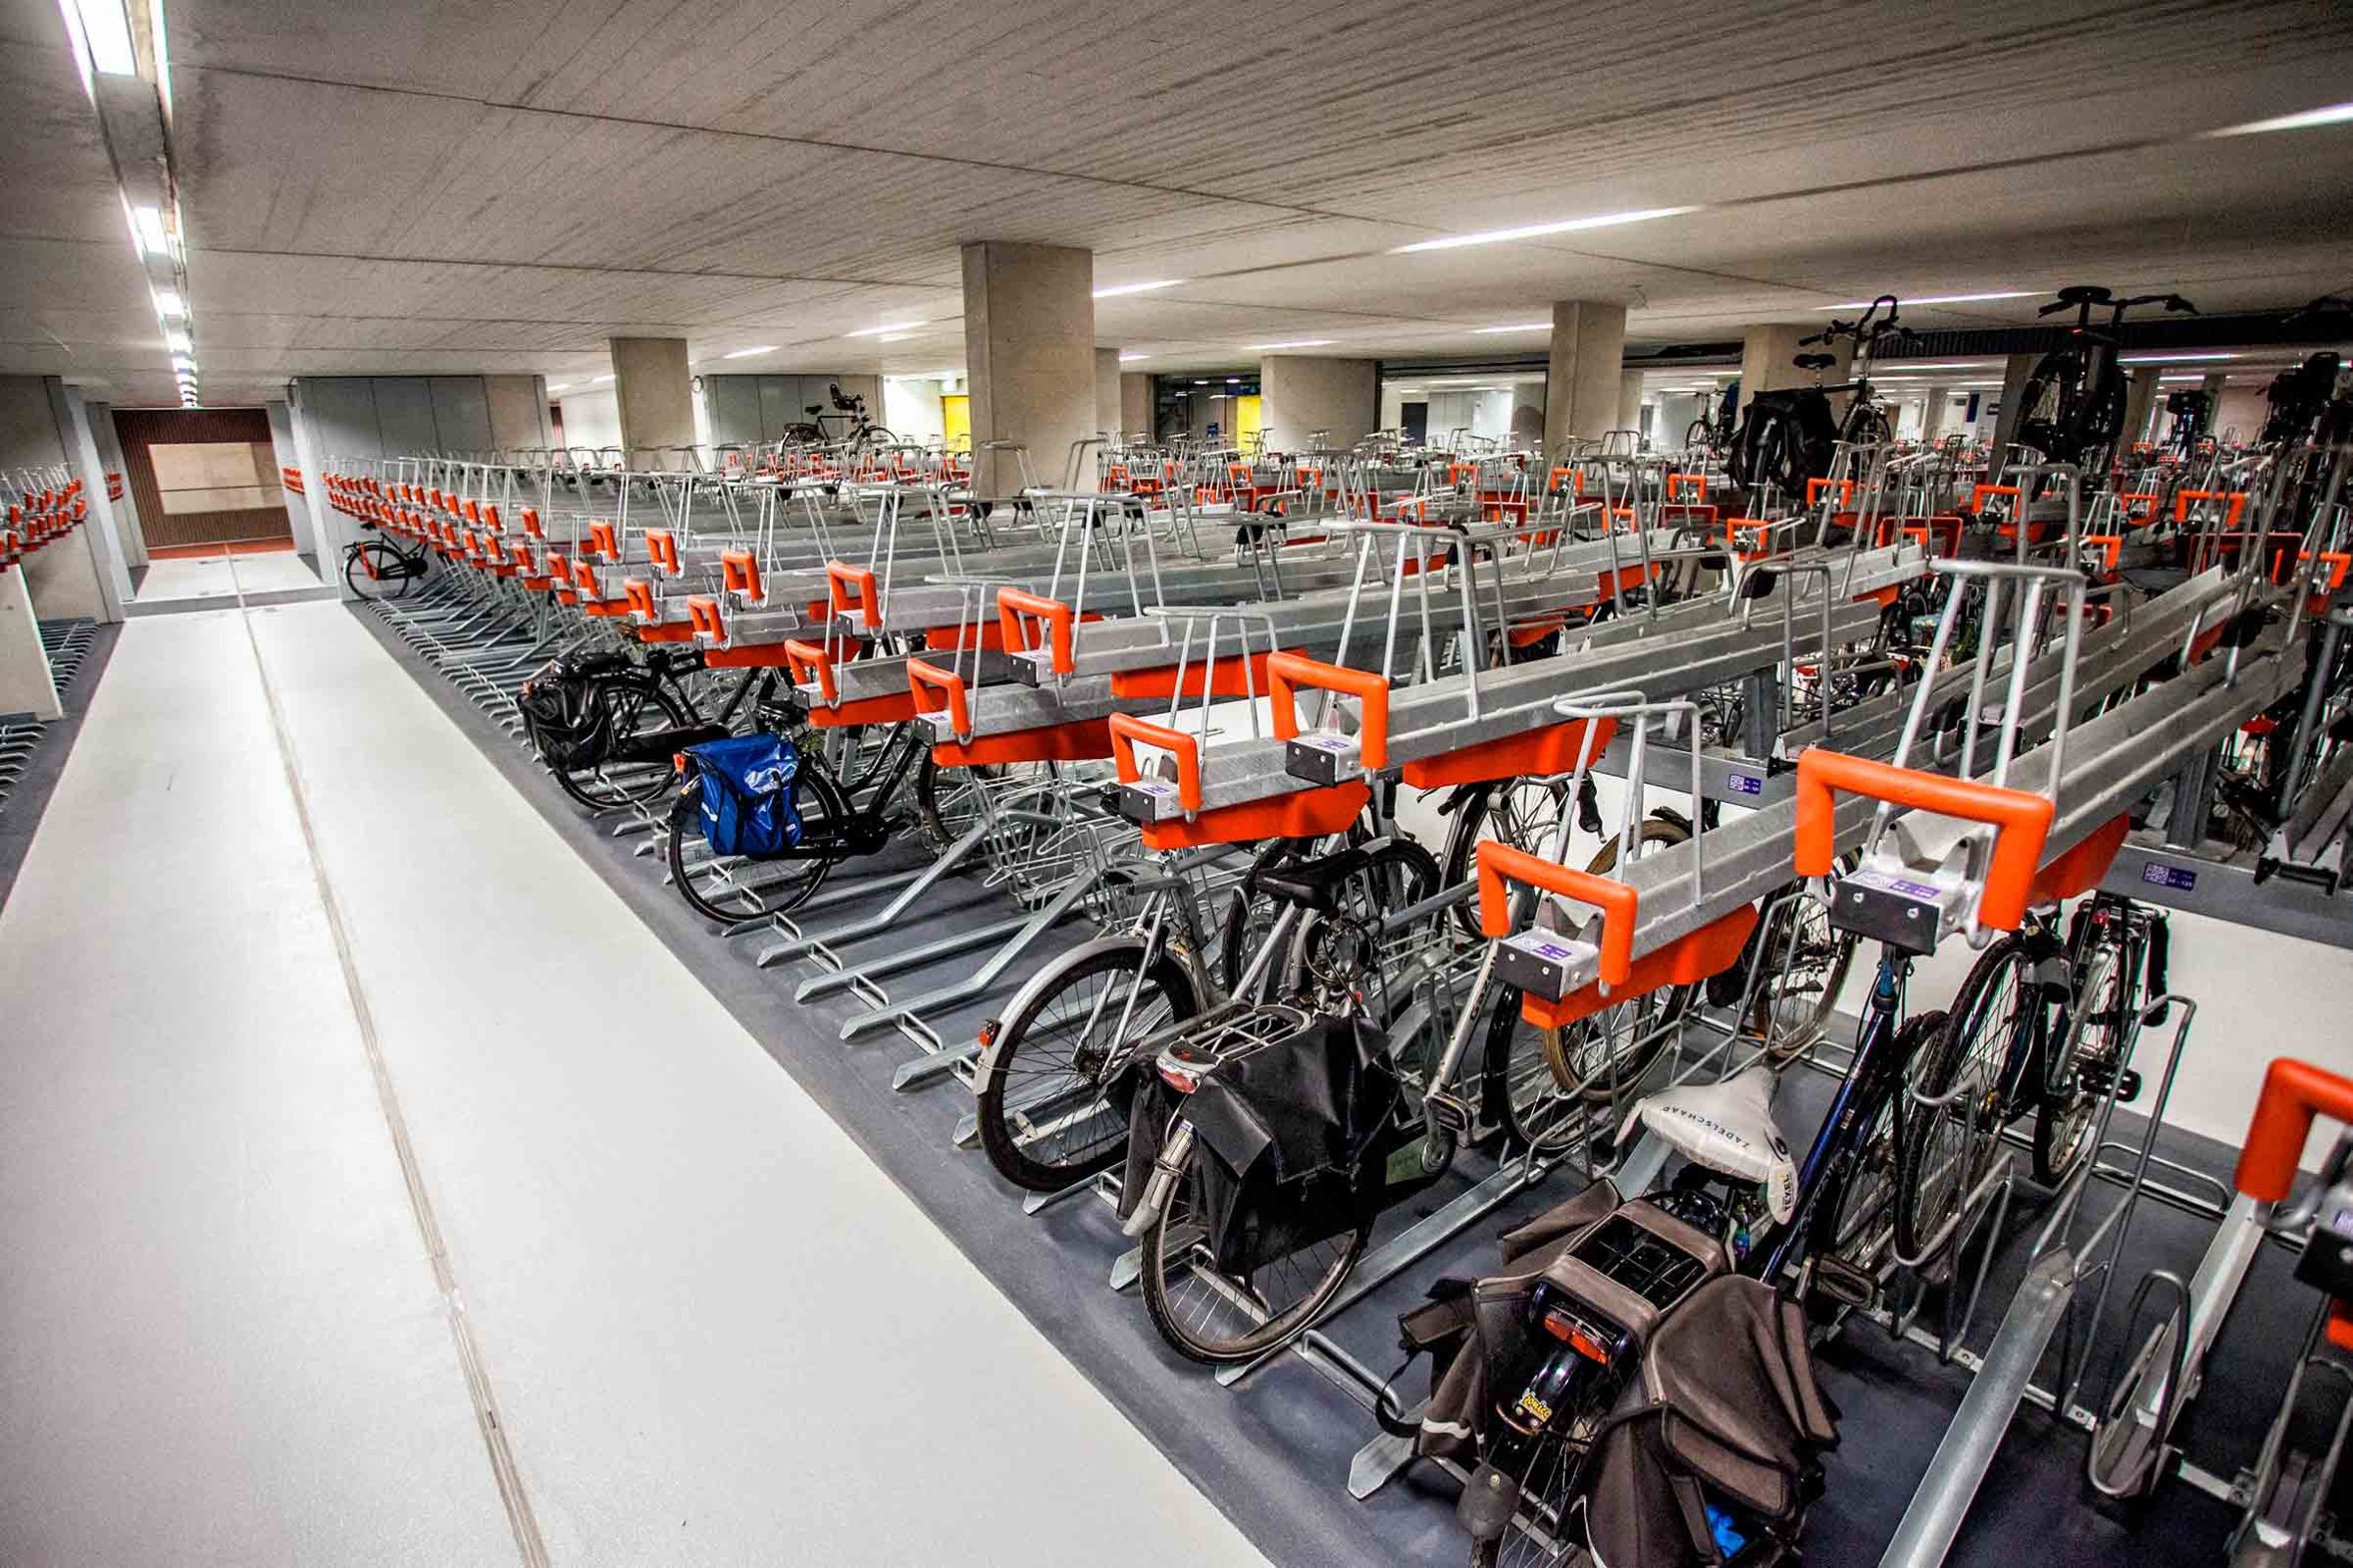 An interior view of part of the largest bicycle storage in Europe, at the Utrecht Central Station in Utrech, Netherlands, Aug. 7. The storage has a capacity of 6,000 bicycles and will be expanded to accomodate 12,500 at the end of 2018.